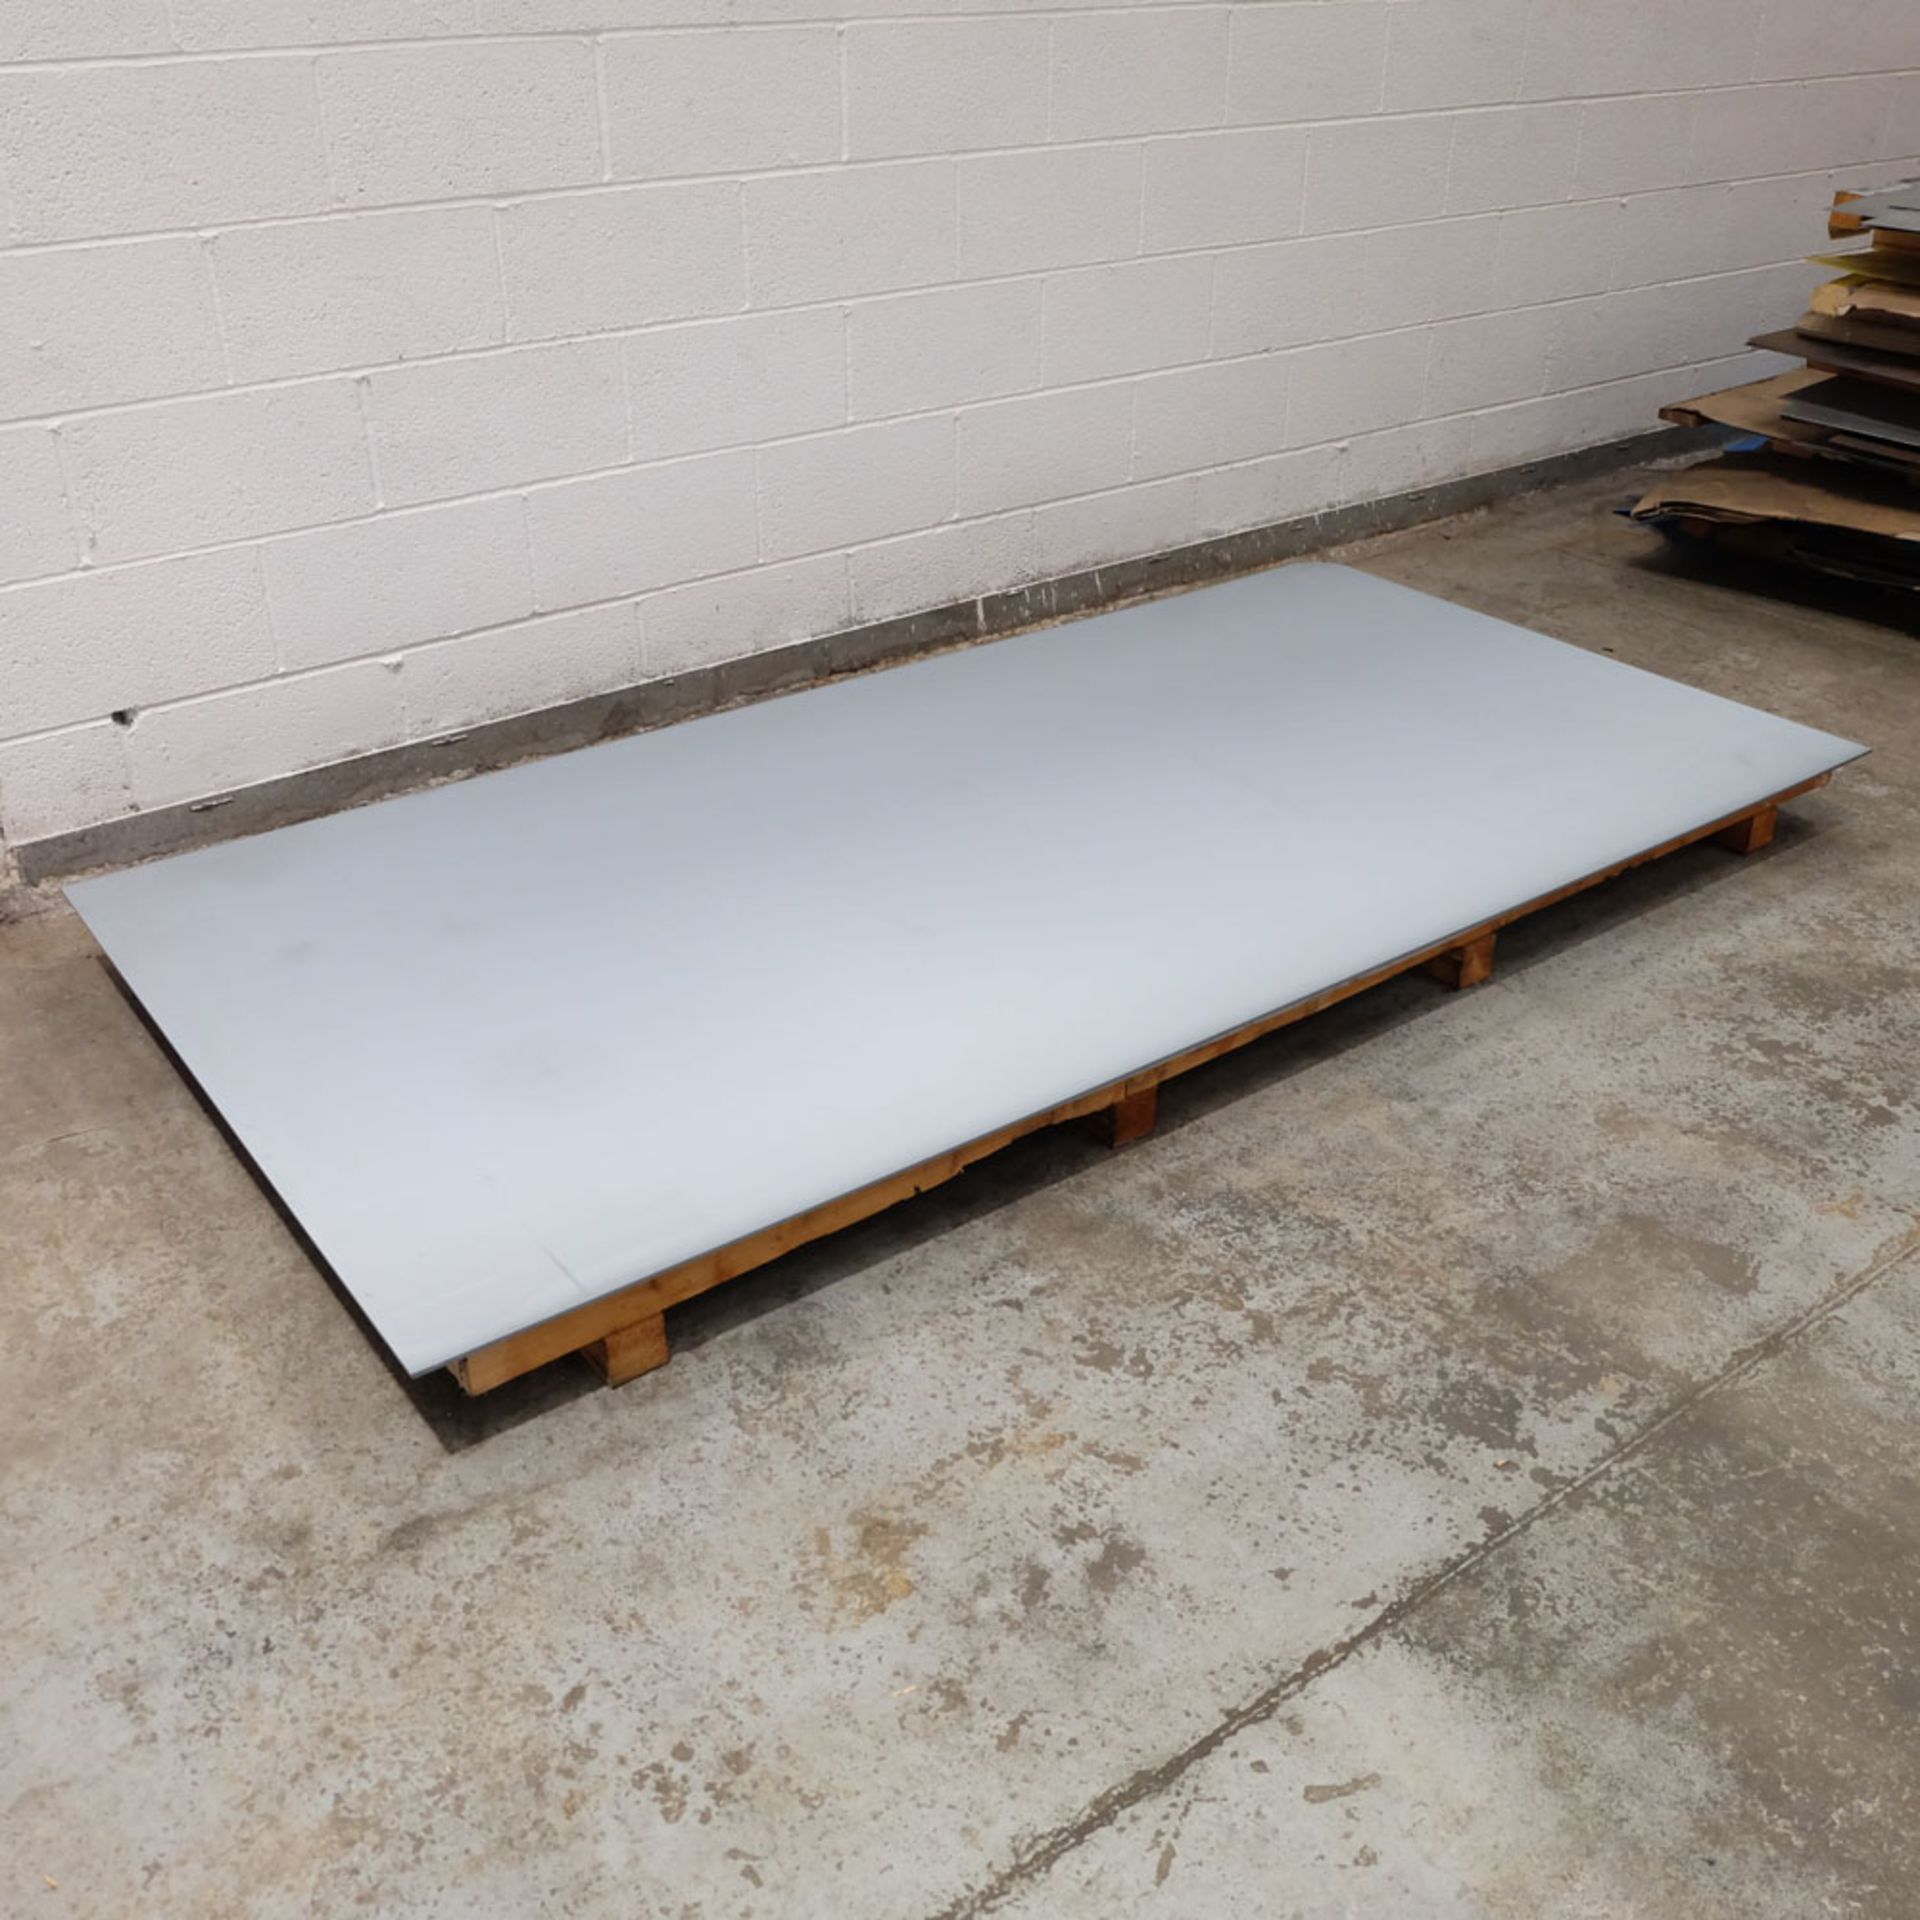 5 x Steel Sheets. Approx 2500mm x 1250mm x 1.2mm Thickness. Damage to Corners. - Image 2 of 6